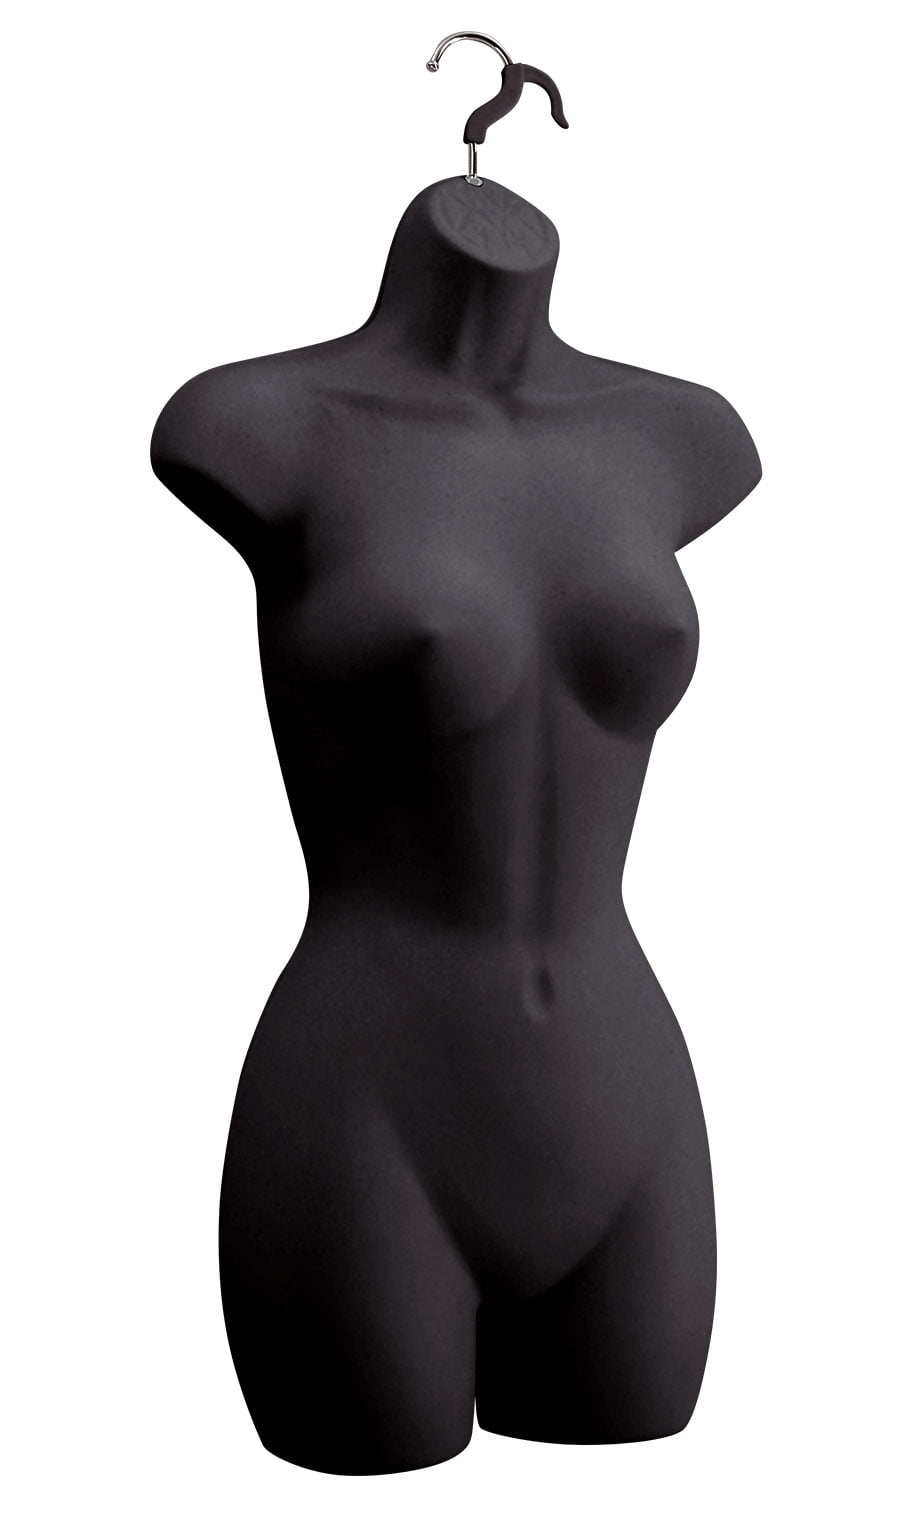 3 Molded Woman's Shirt Torso Forms Fits 5 to 10 Hanging Female Mannequin White 